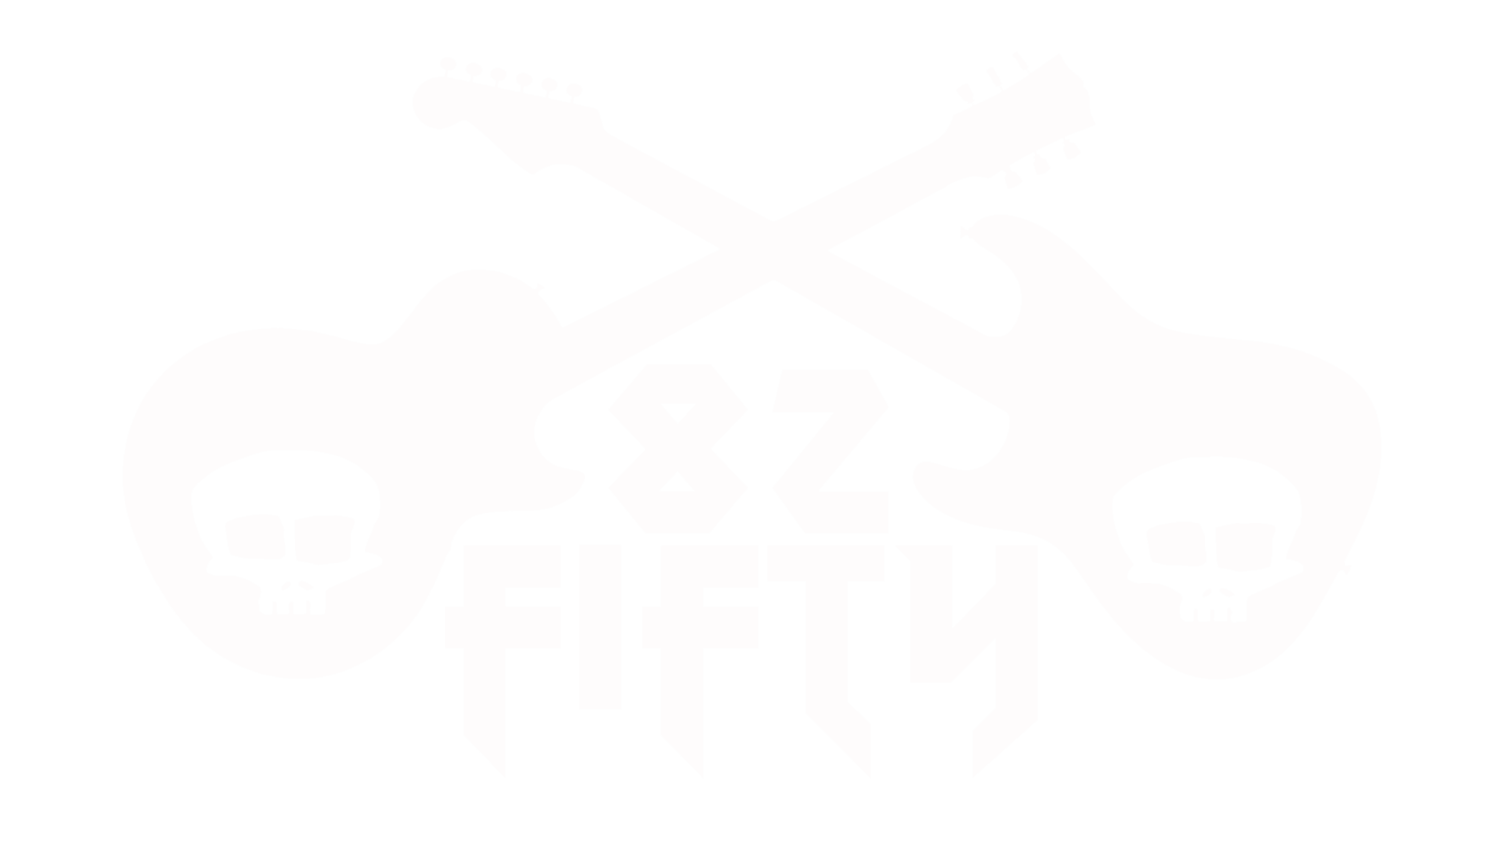 82fifty